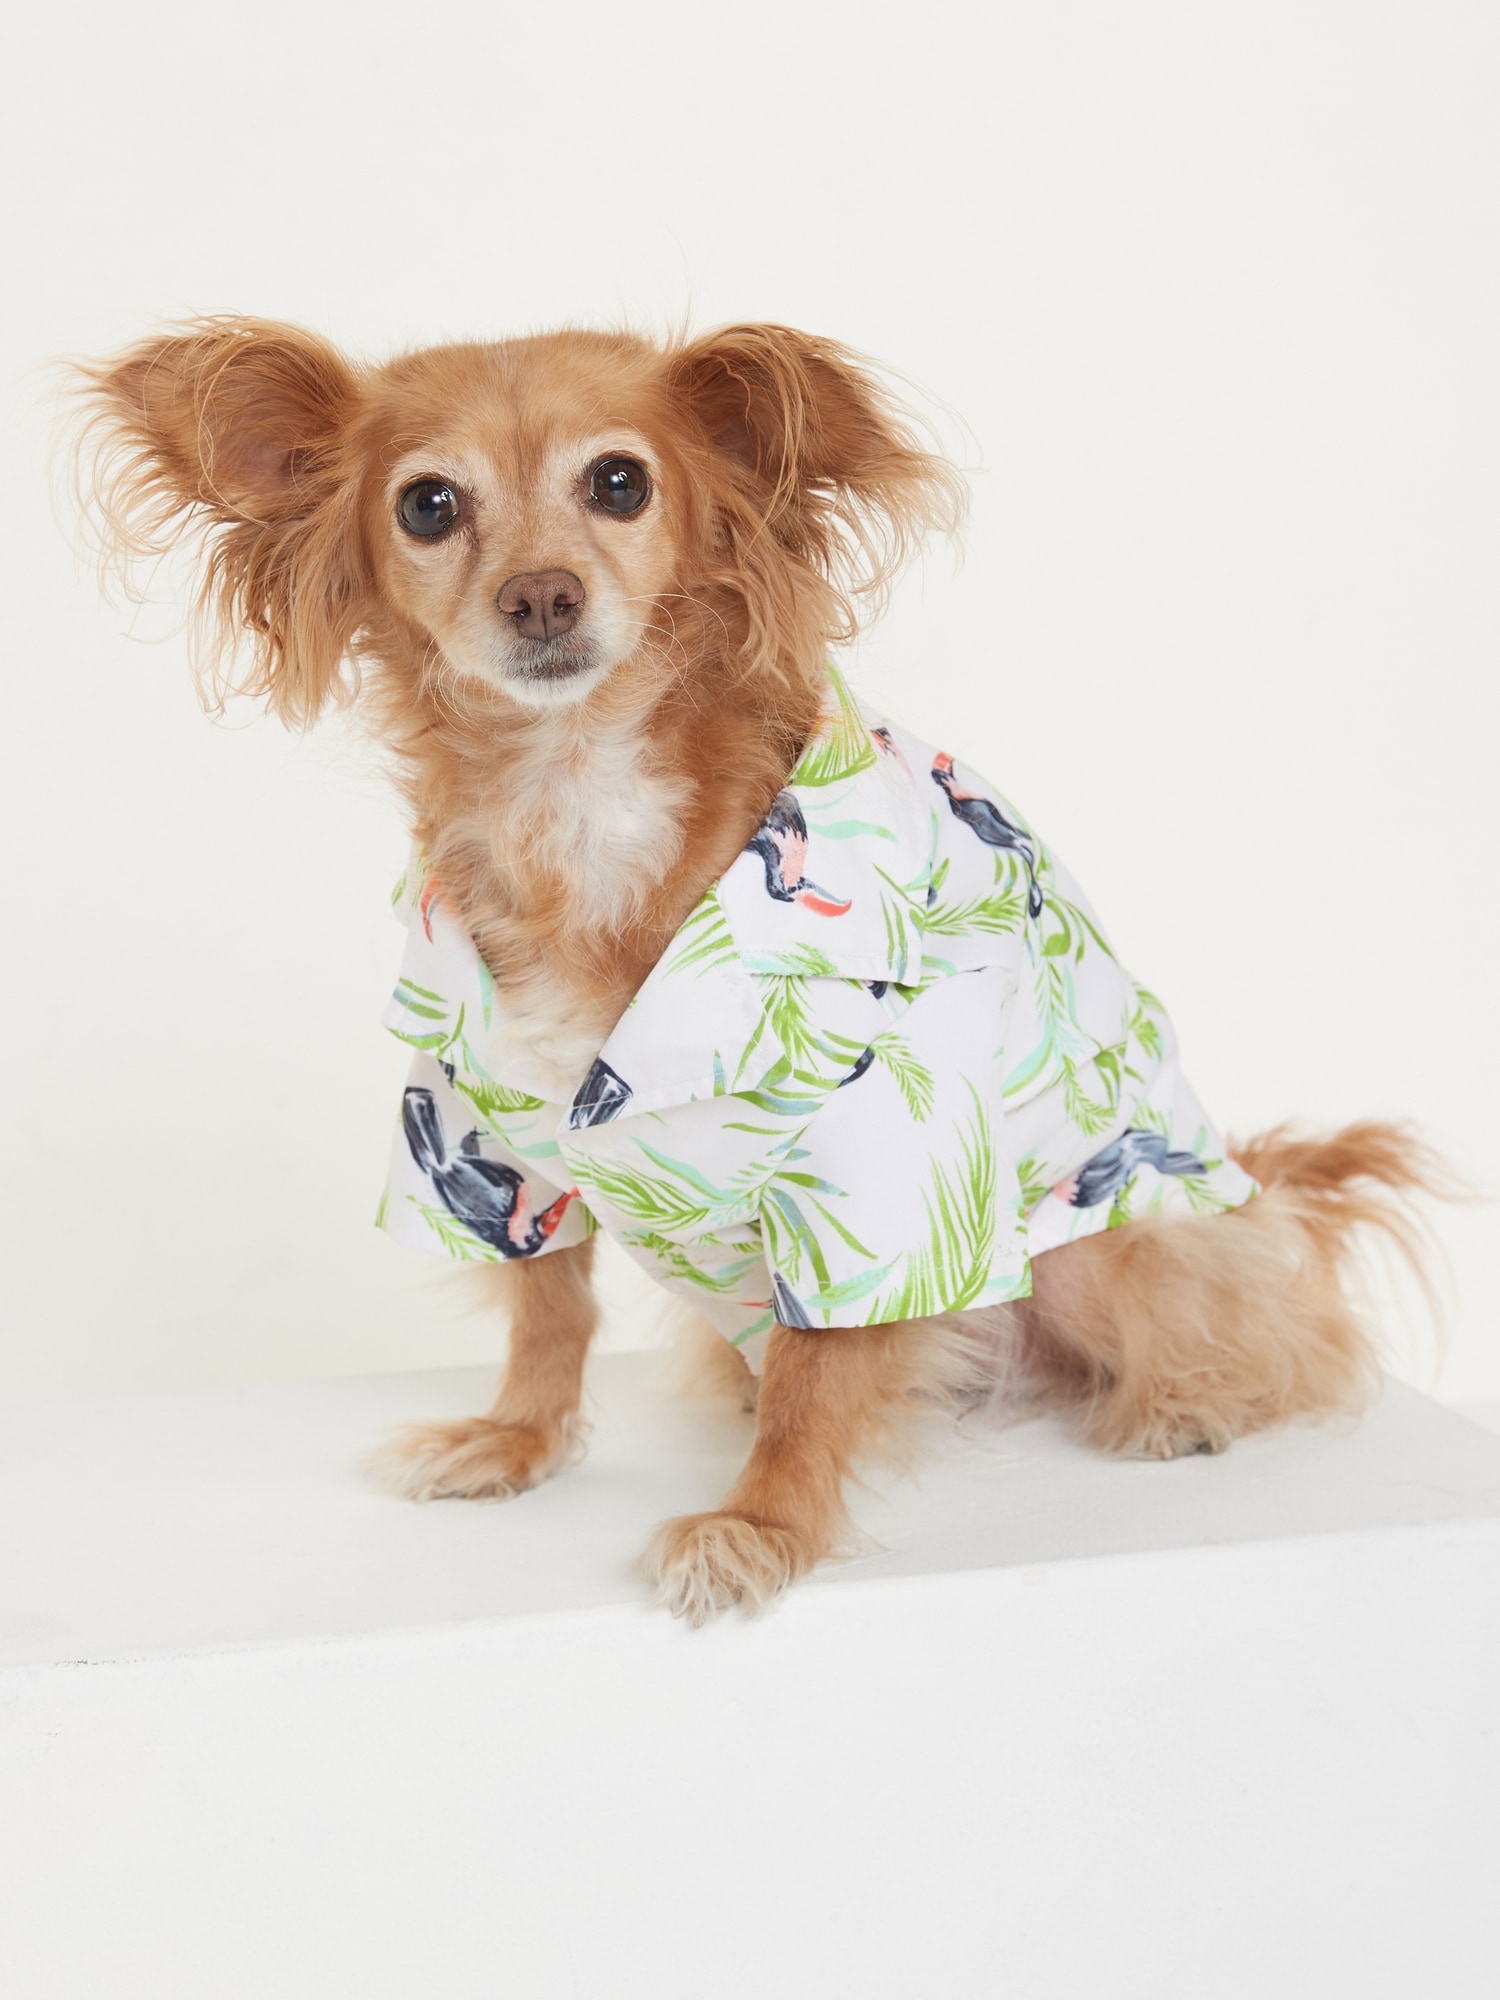 Printed Resort Shirt for Pets On Sale At Old Navy